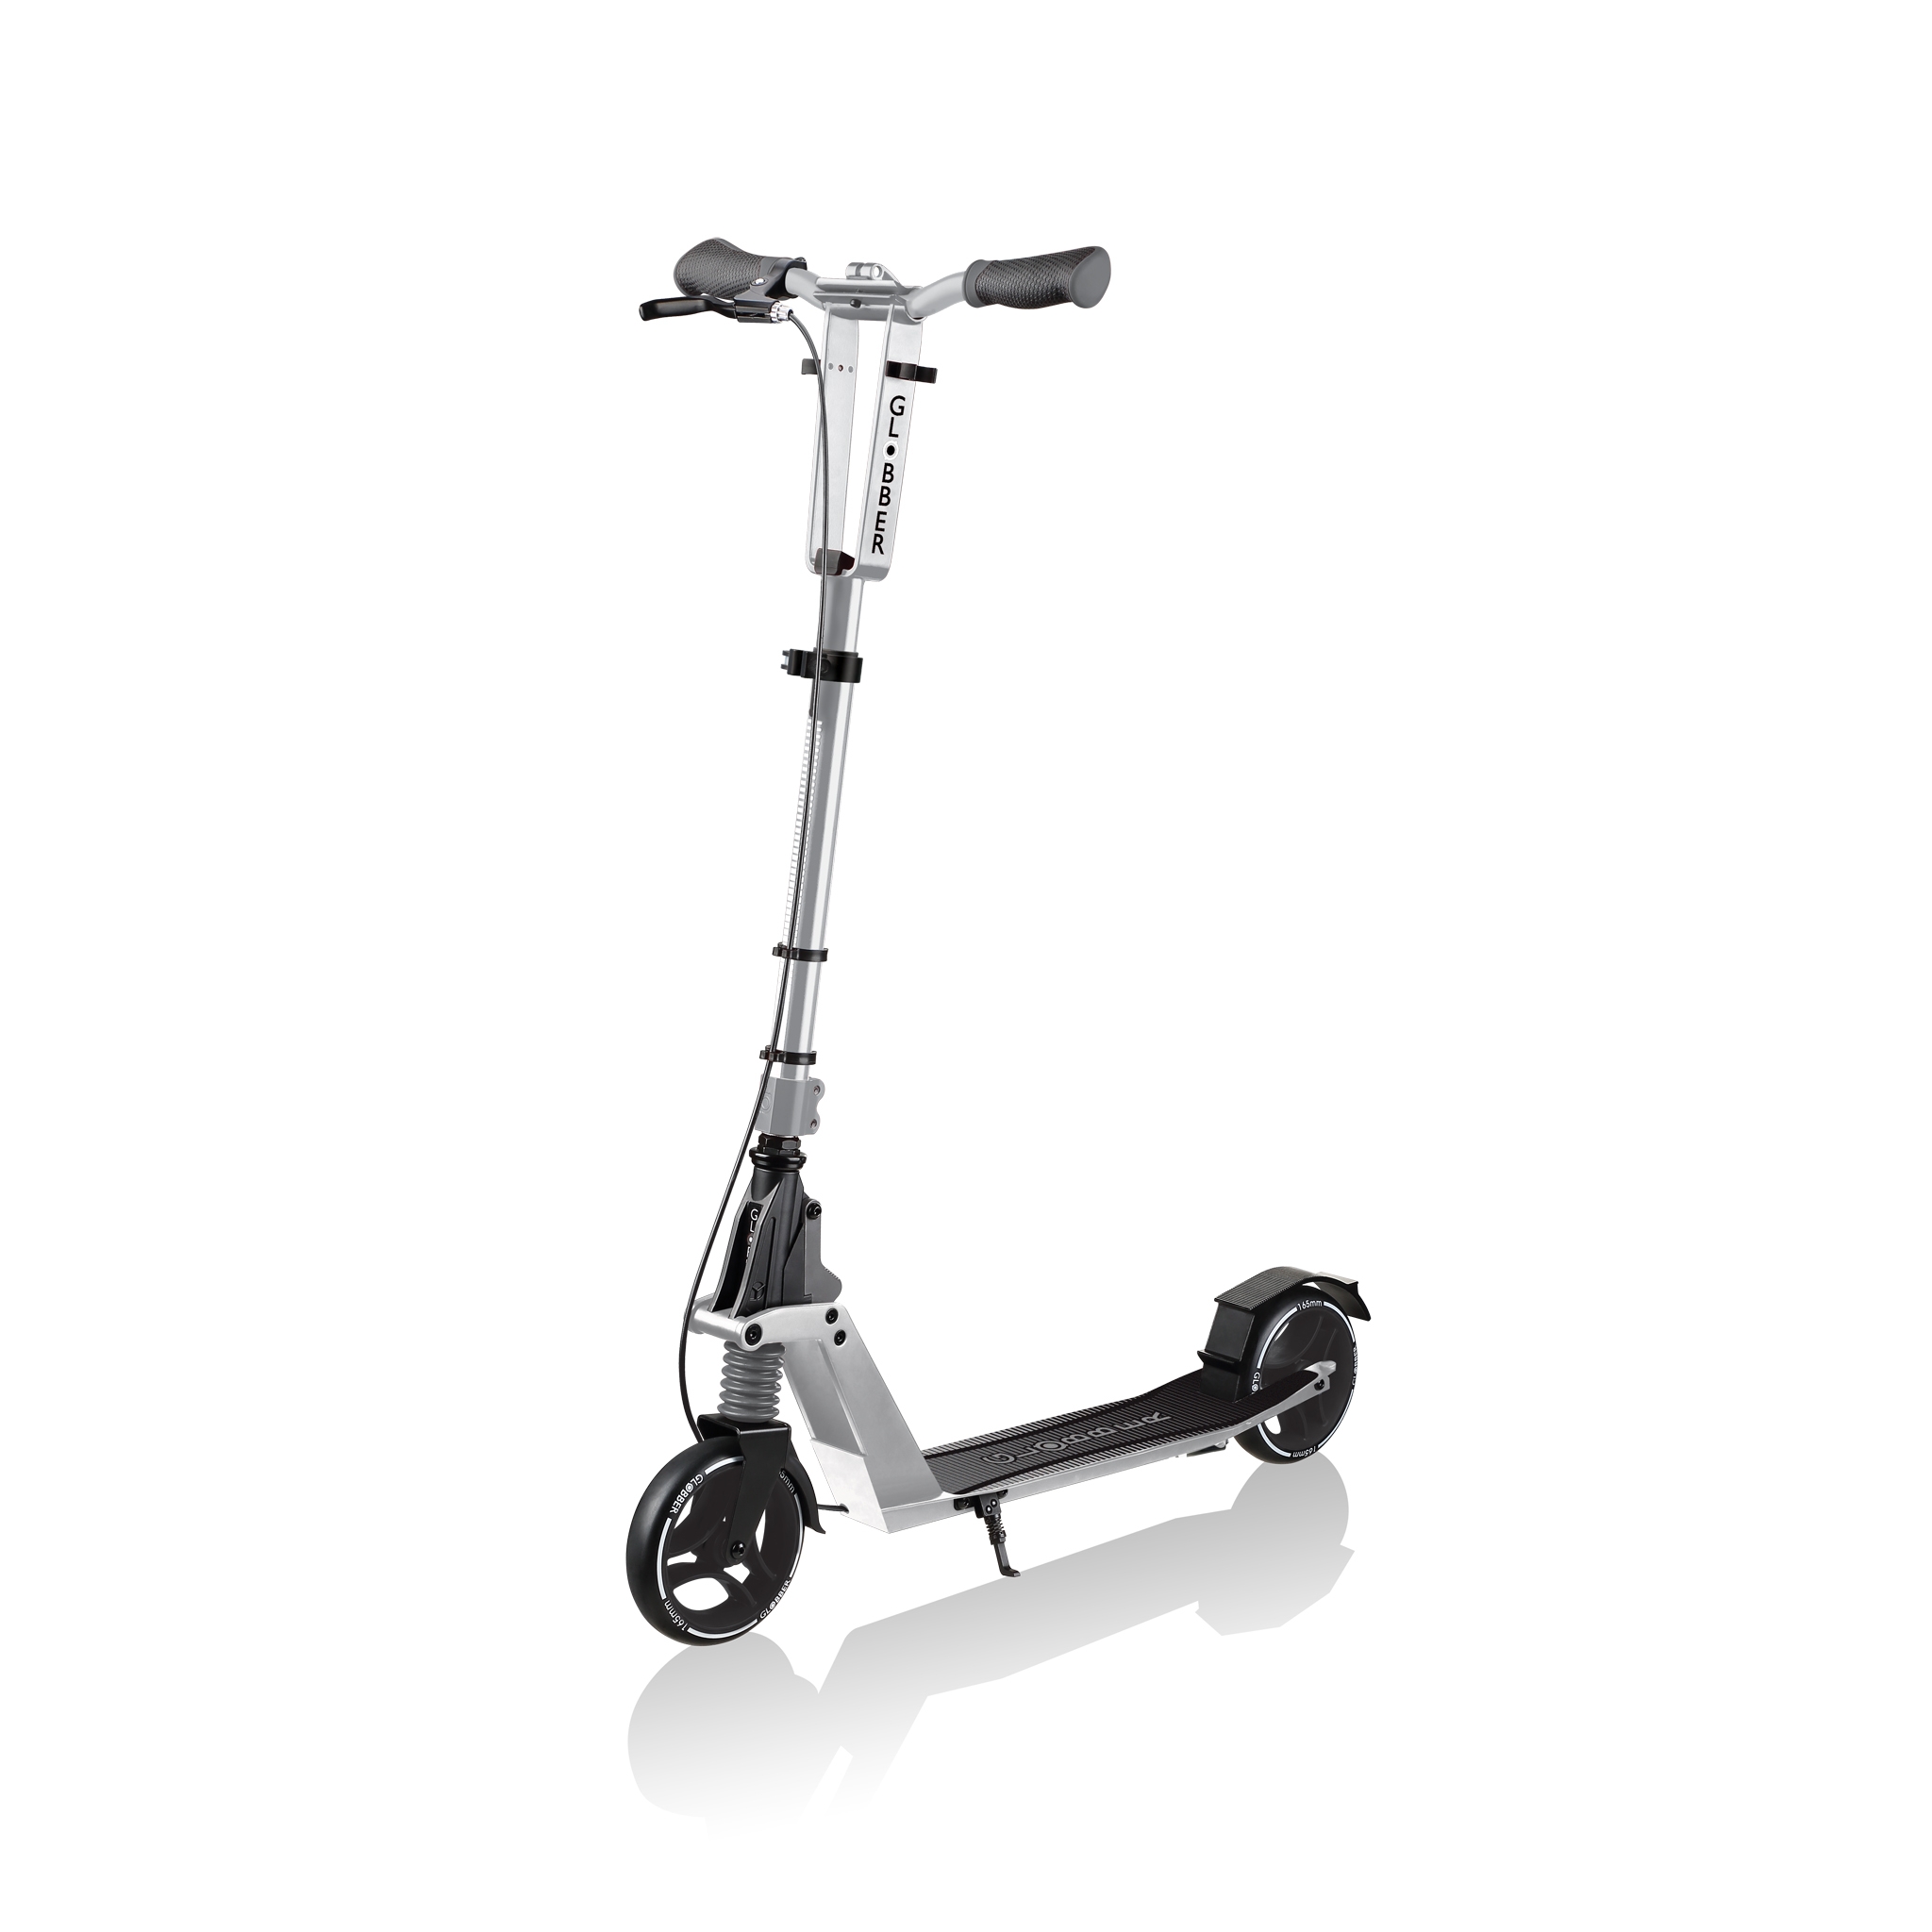 ONE-K-165-BR-award-winning-2-wheel-foldable-scooter-for-teens-and-adults-aged-14-and-above_silver 0